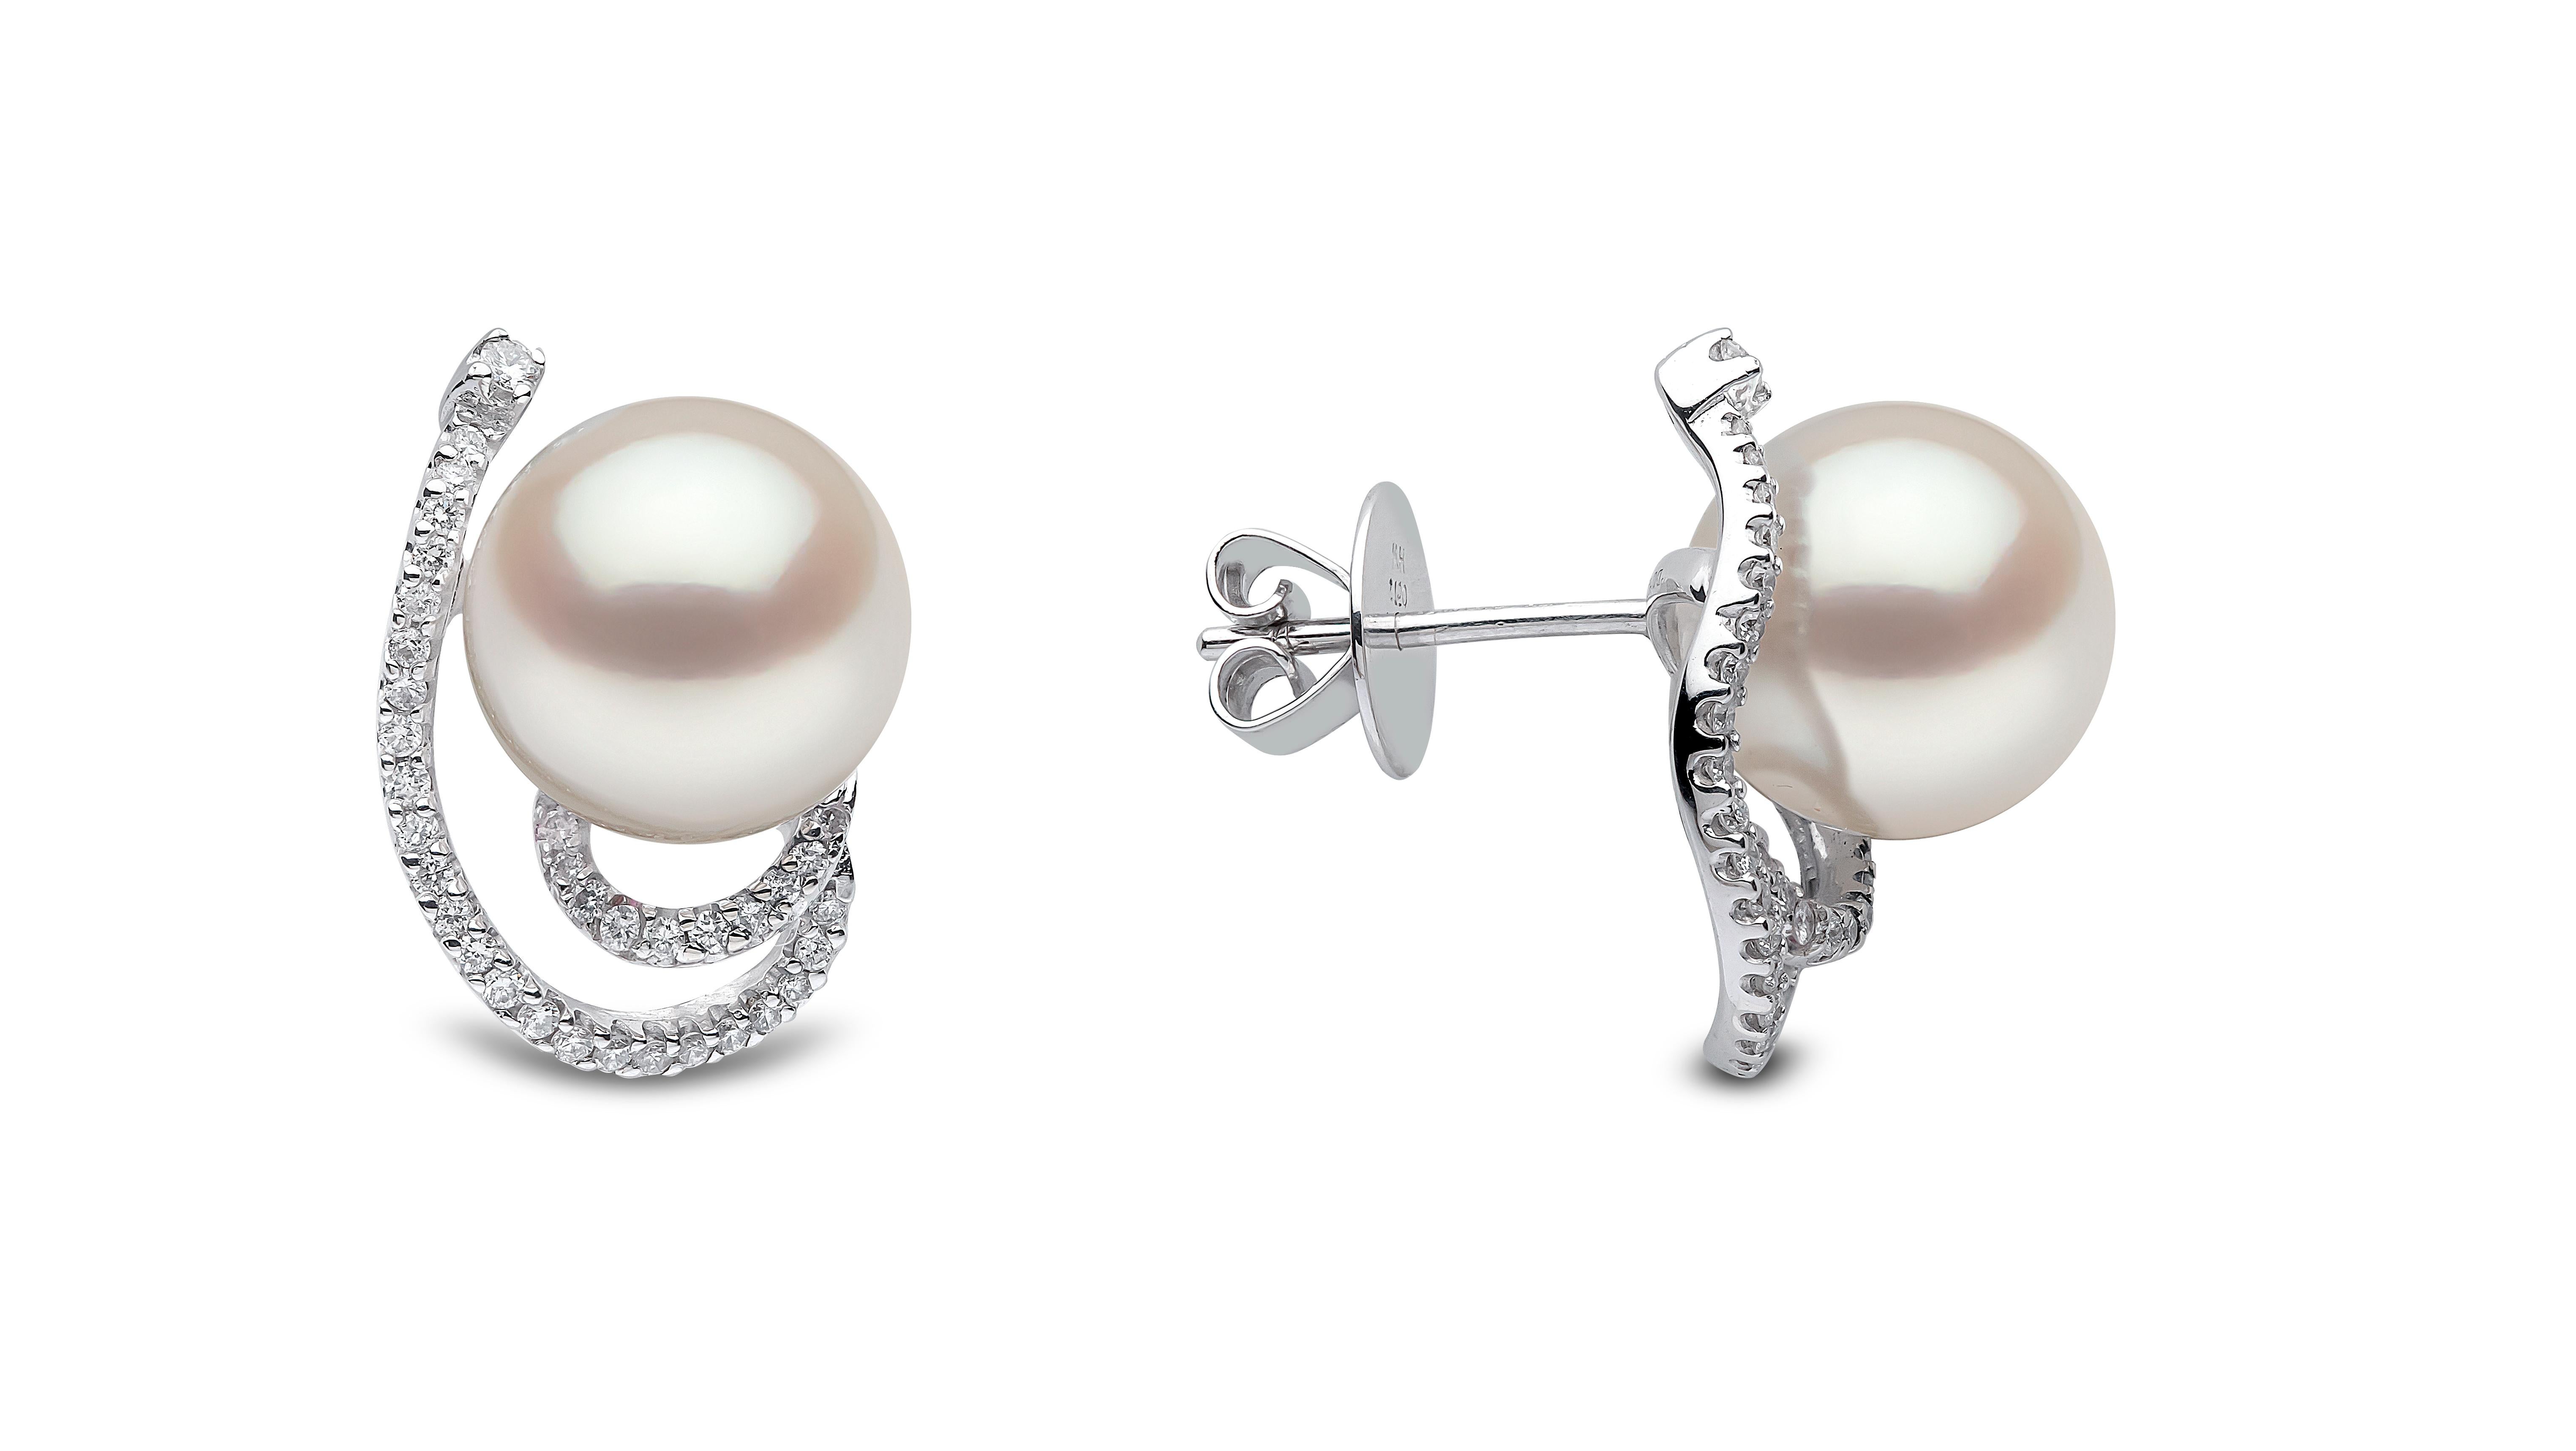 A contemporary twist of a classic stud design, these earrings by Yoko London feature a sparkling swirl around lustrous 11-12mm South Sea pearls, all set in luxurious 18K white gold. Easily styled for daily or evening outfits. Secured with a post and